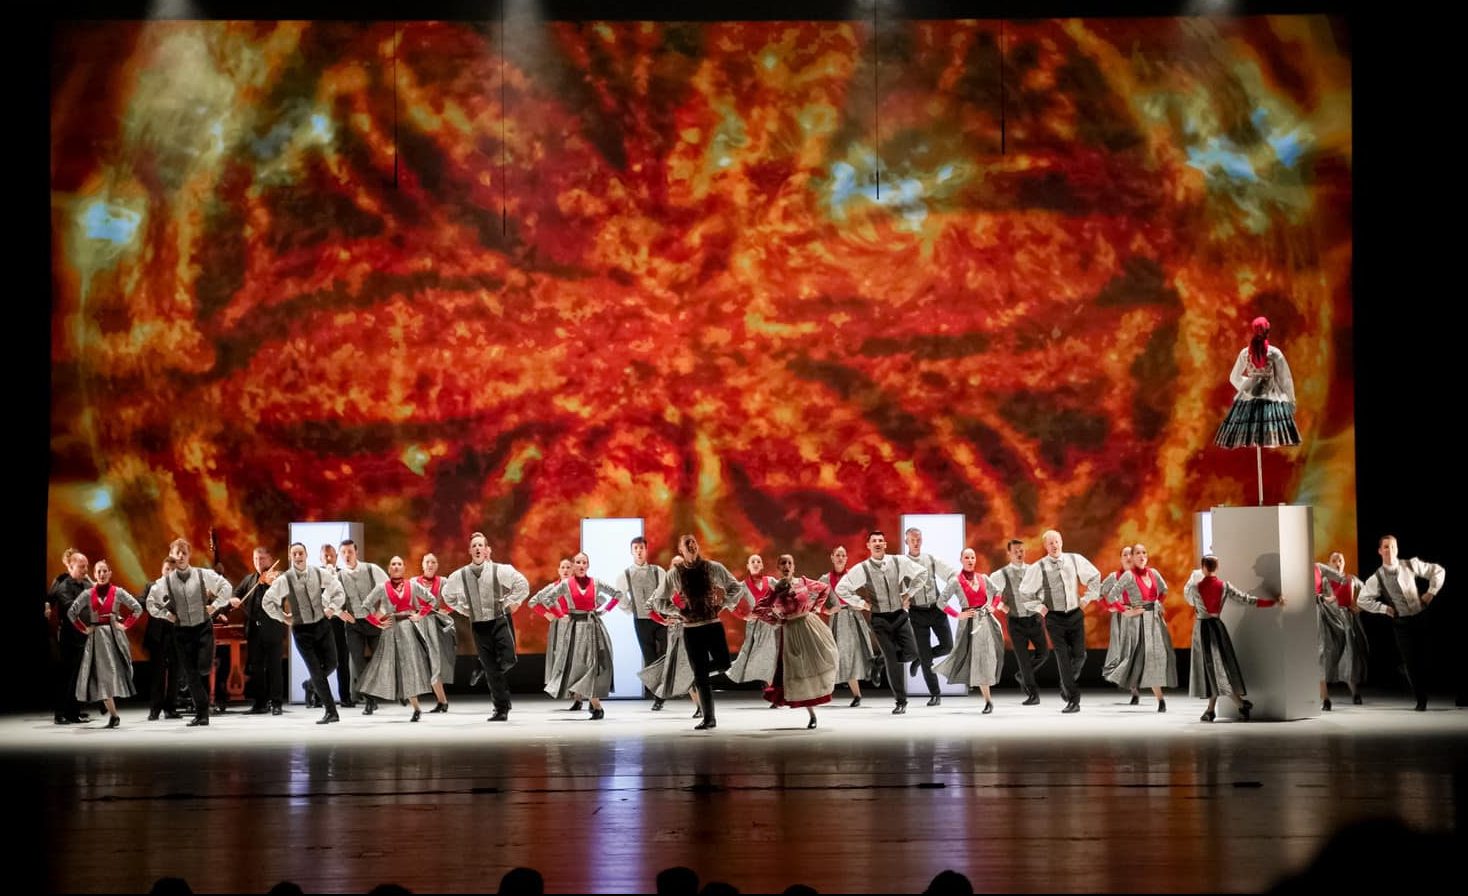 Hungarian Folk Ensemble Performs Traditional Dance on the Great Wall of China